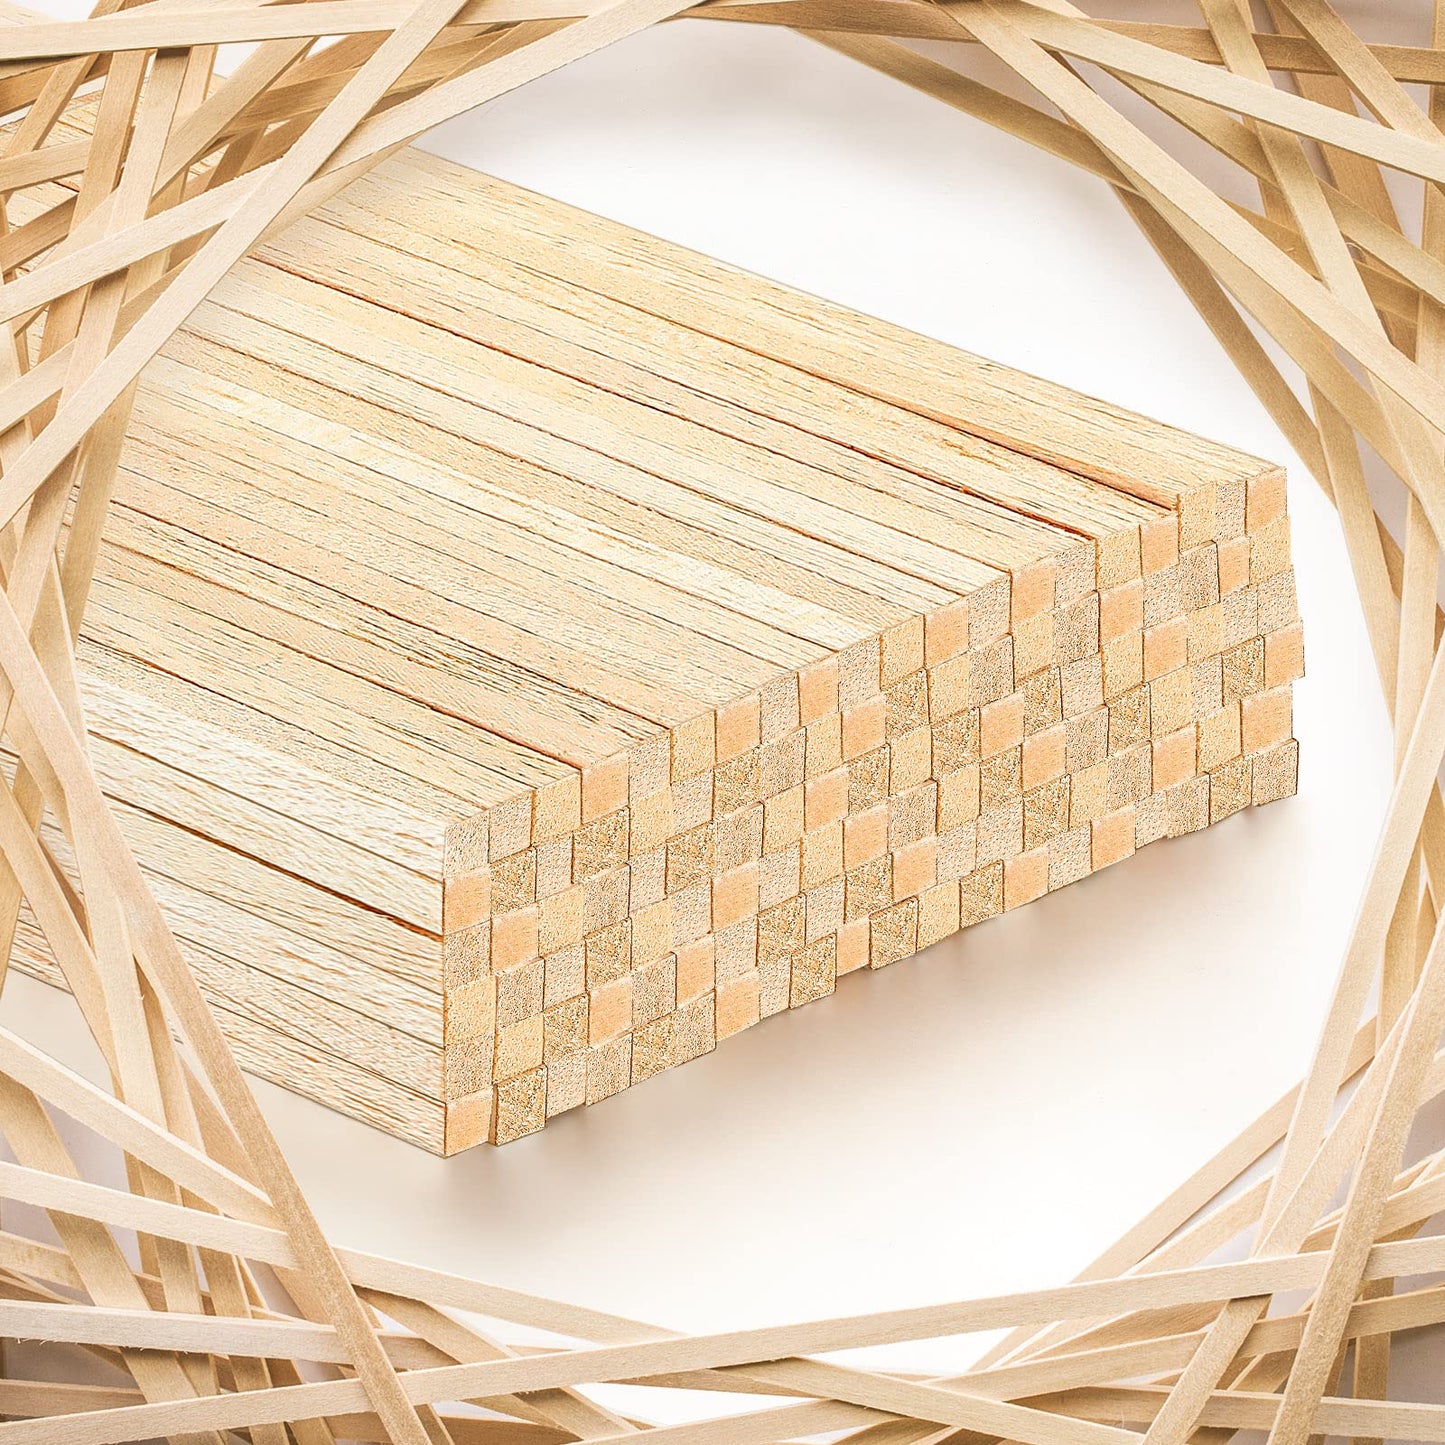 120 Pieces Balsa Wood Sticks 1/4 x 1/4 x 12 Inch Balsa Wood Strips Hardwood Square Wooden Dowels Unfinished Balsa Wood Strips for Craft DIY Supplies